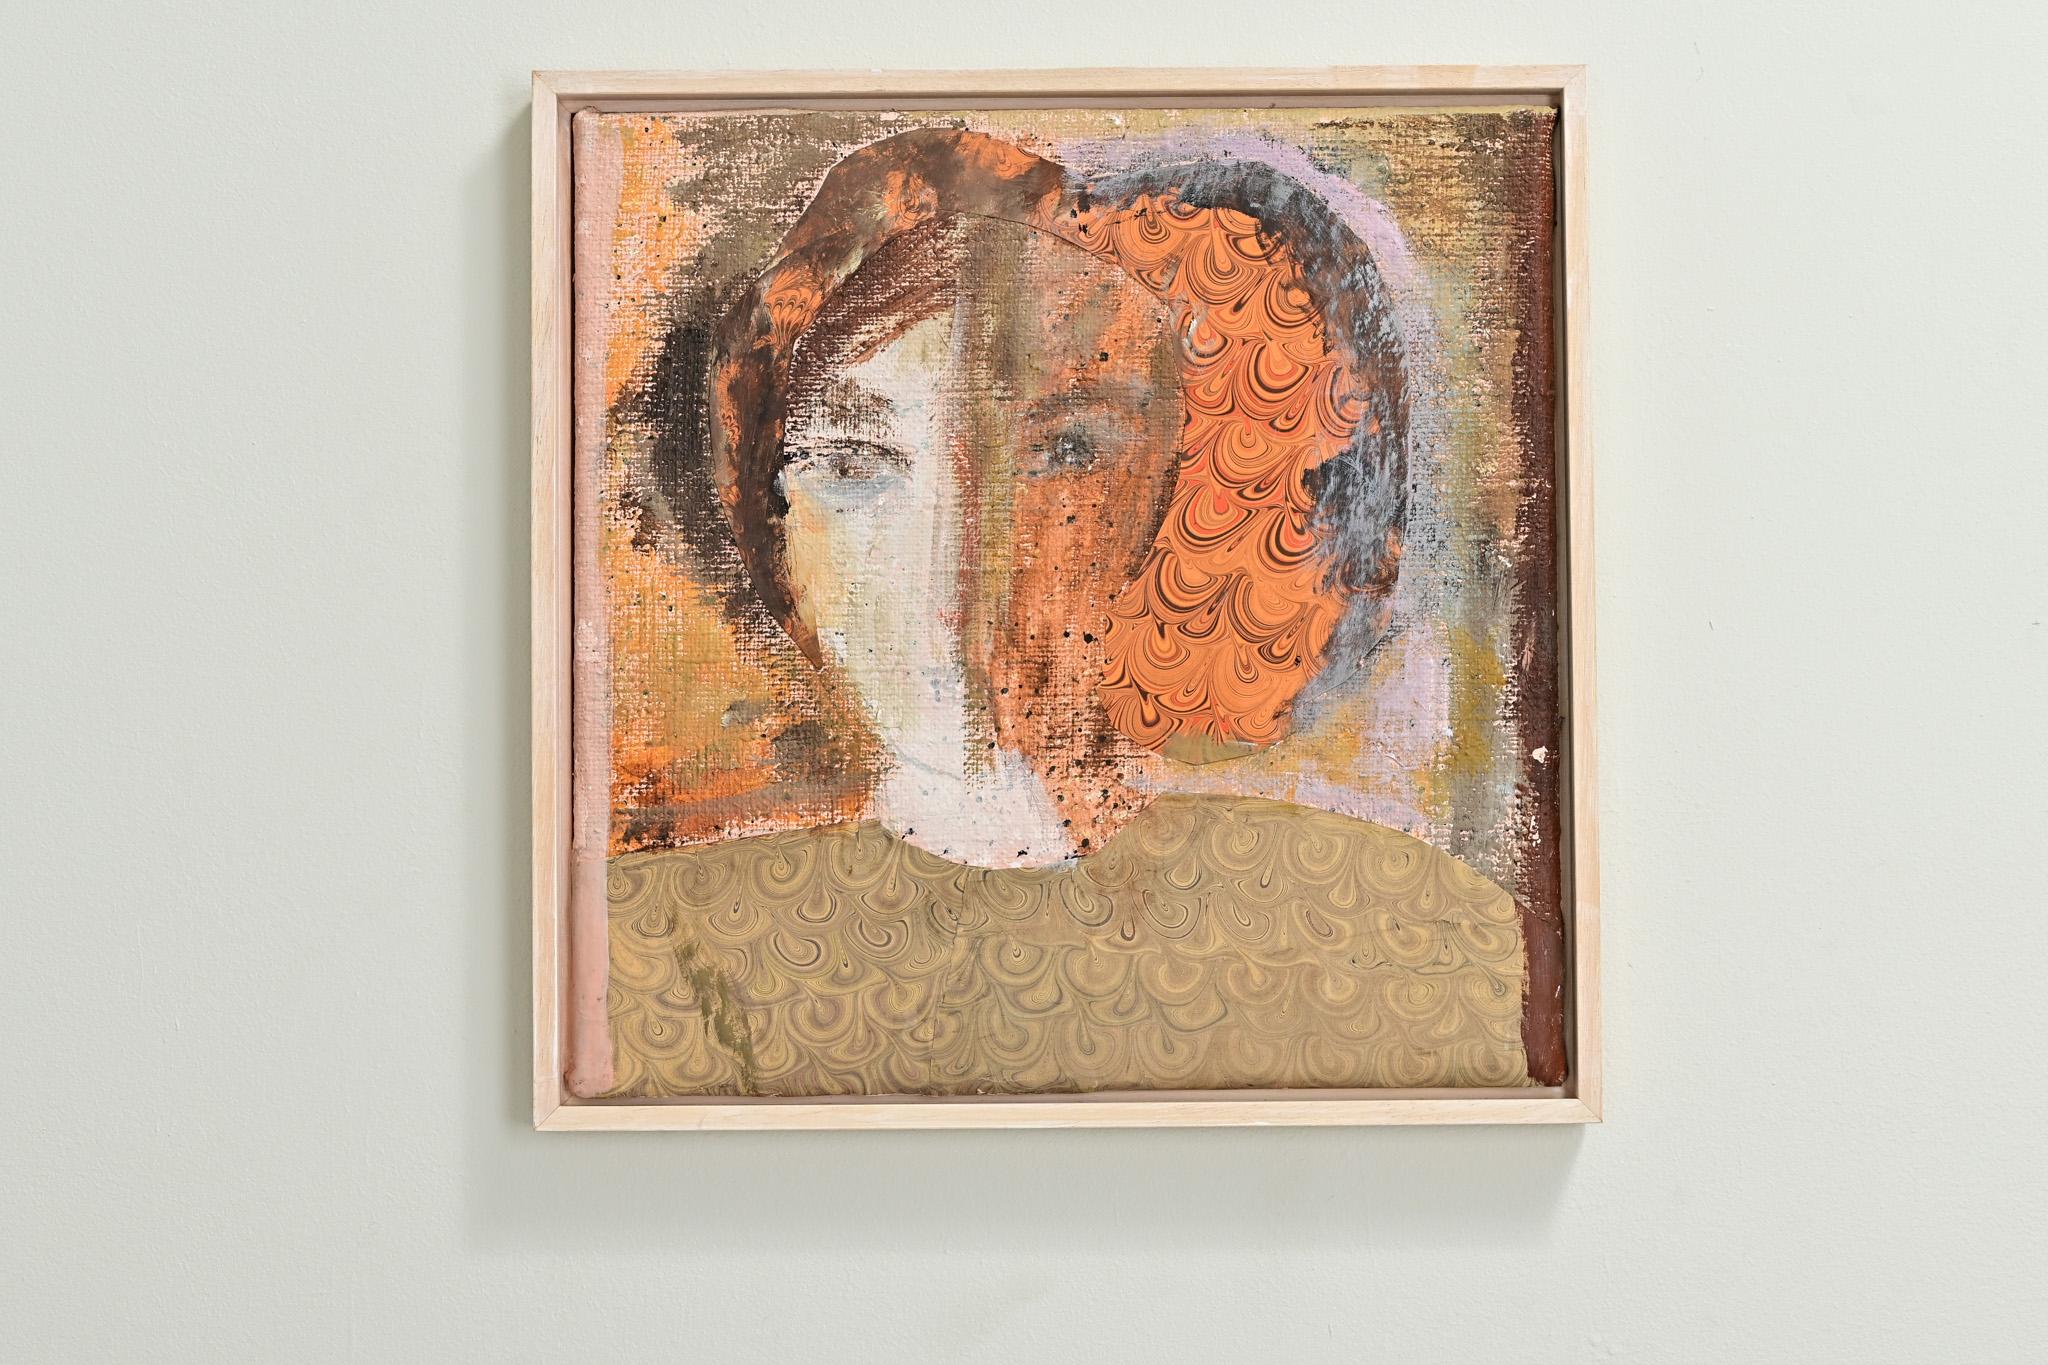 A recently made painting of a lady by an unknown Dutch artist. The mixed media collection of materials on canvas depicts a lady's face and is framed in a simple wood frame. Be sure to view the detailed images.